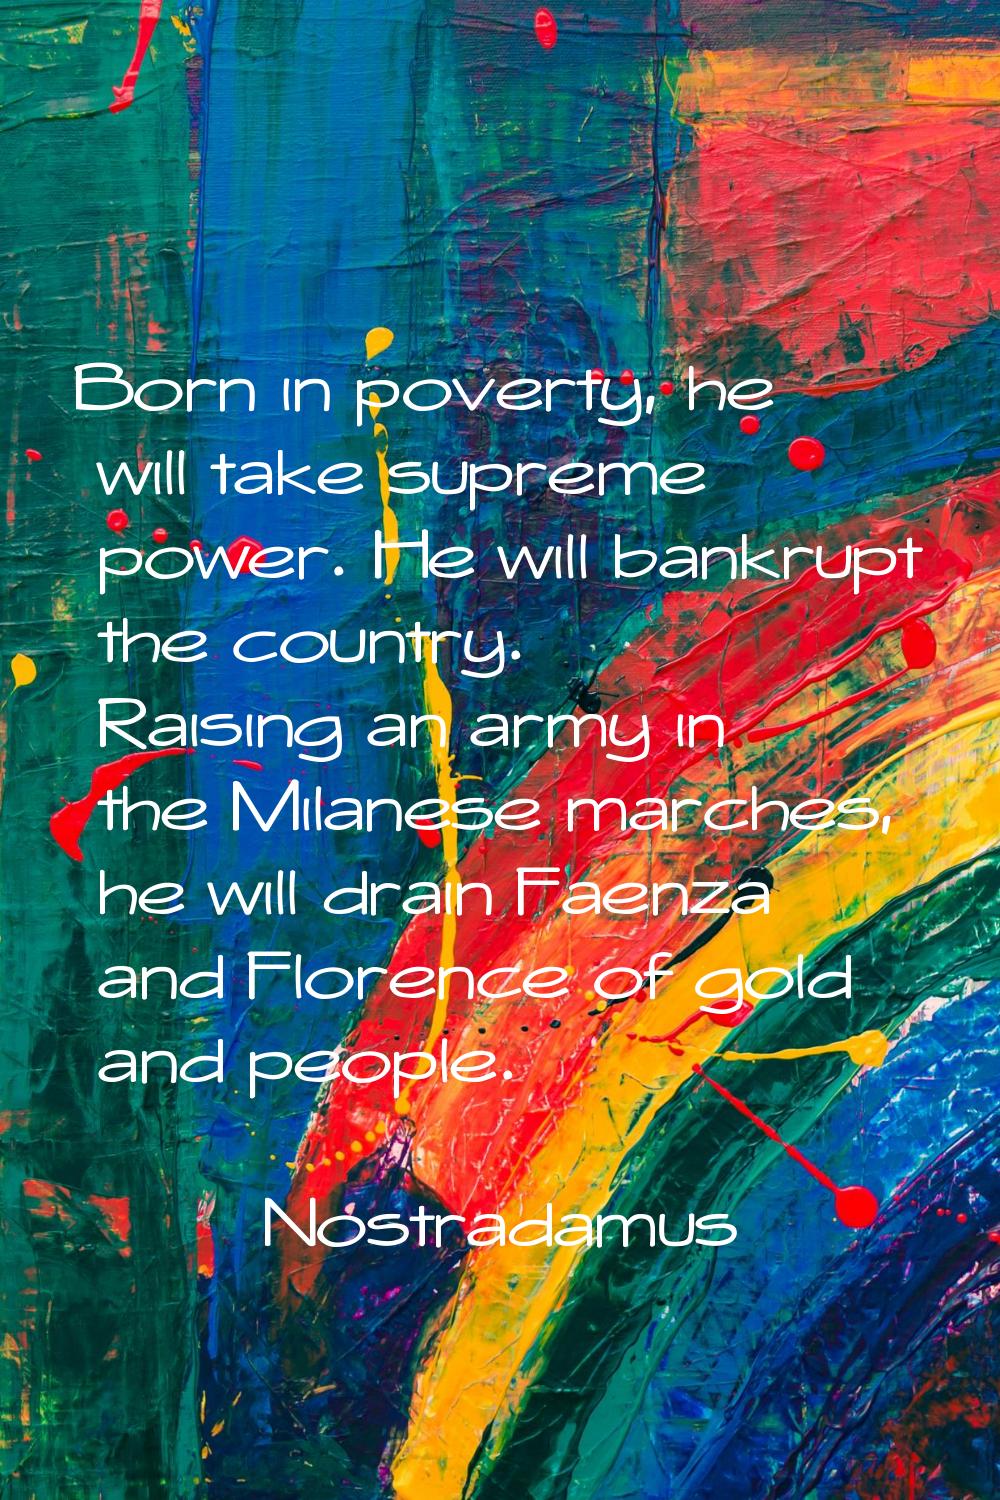 Born in poverty, he will take supreme power. He will bankrupt the country. Raising an army in the M